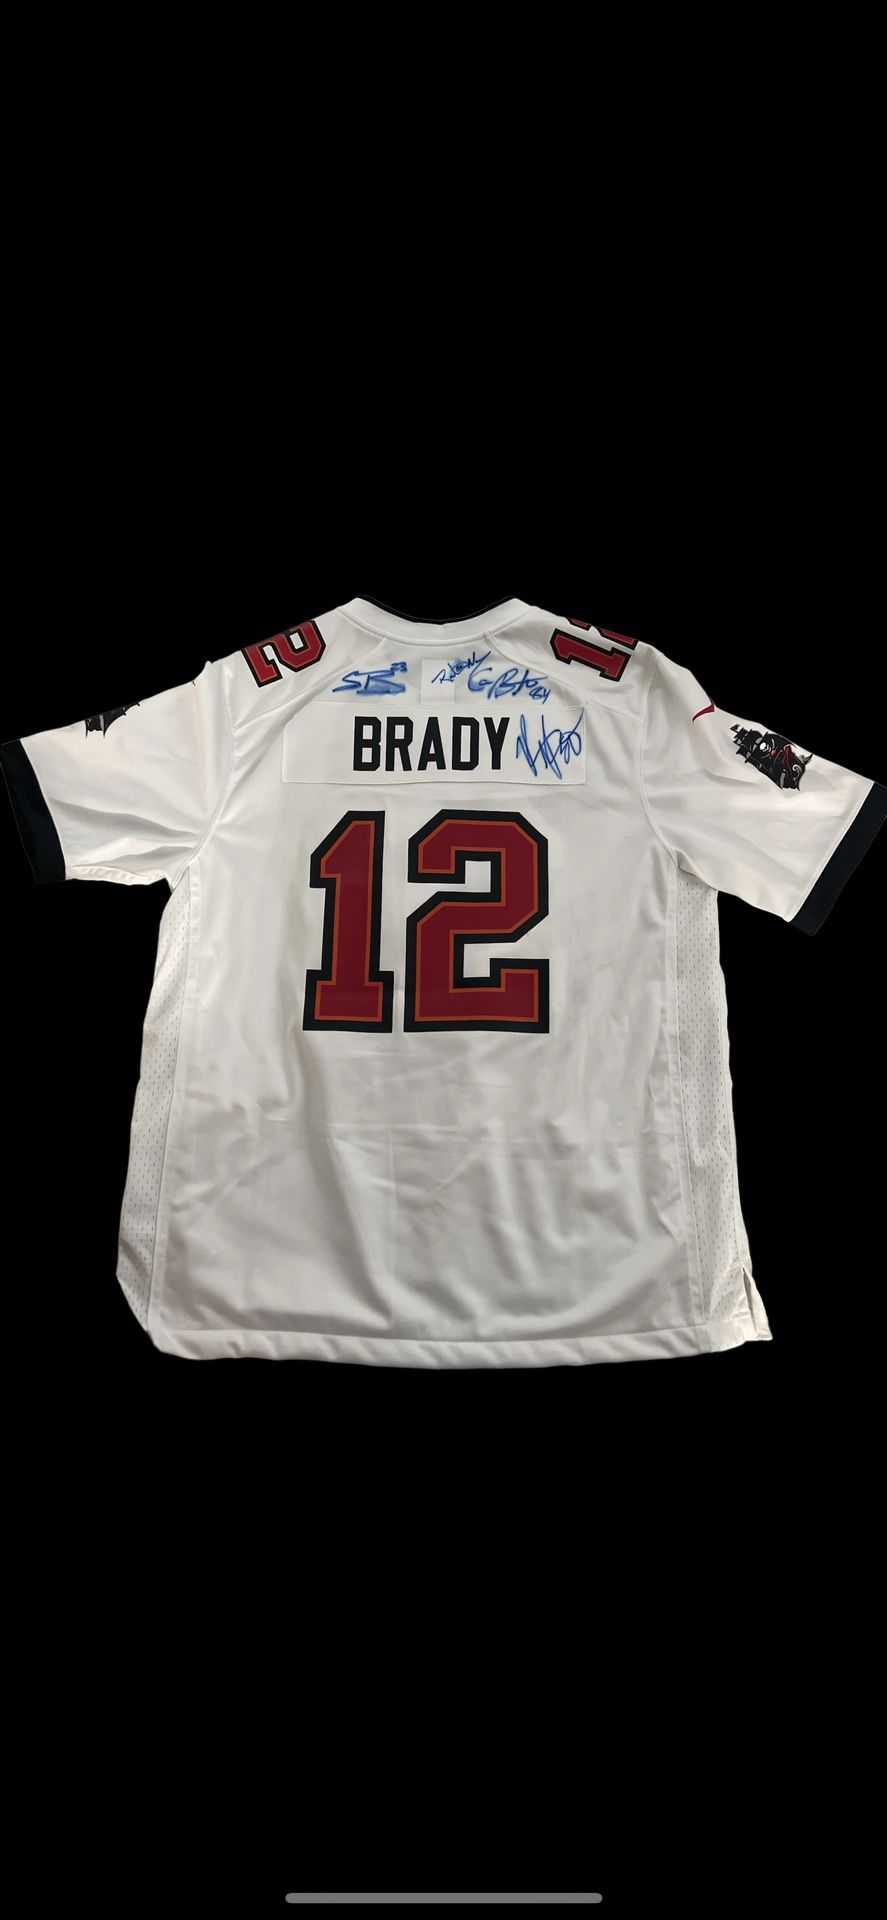 Tom Brady JERSEY & Mike Evan’s #13 12 signed My Ferrari Shoes Players